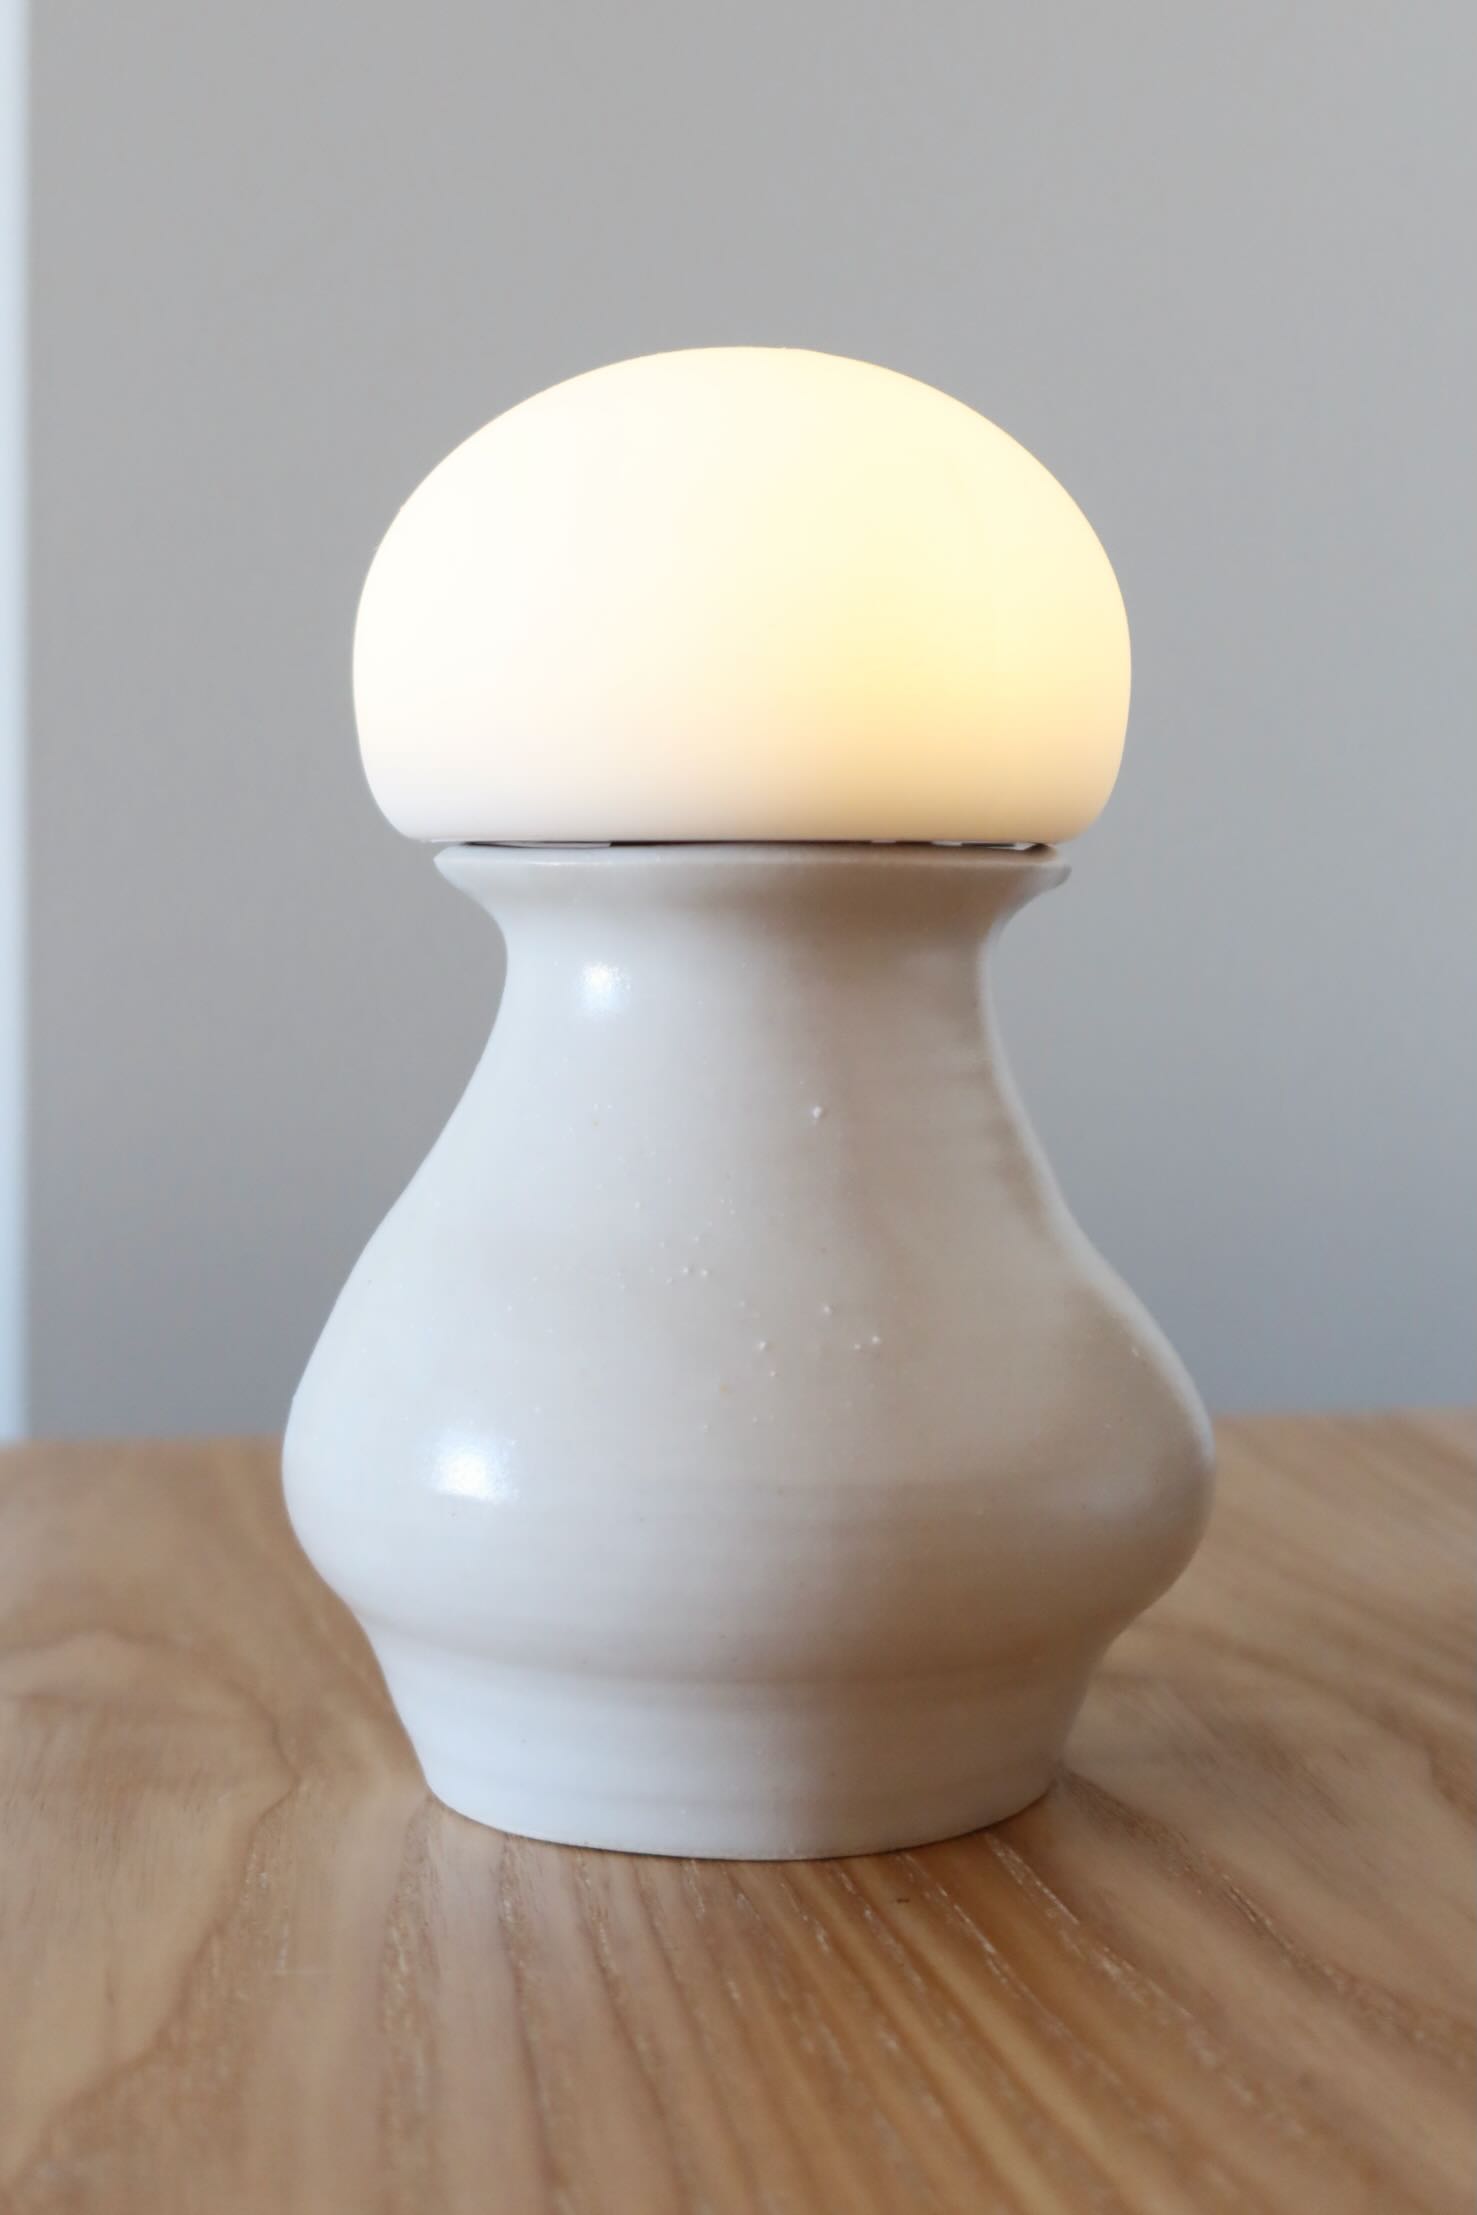 assets/ceramics3.jpeg|Photo of a ceramic vase with a light on top